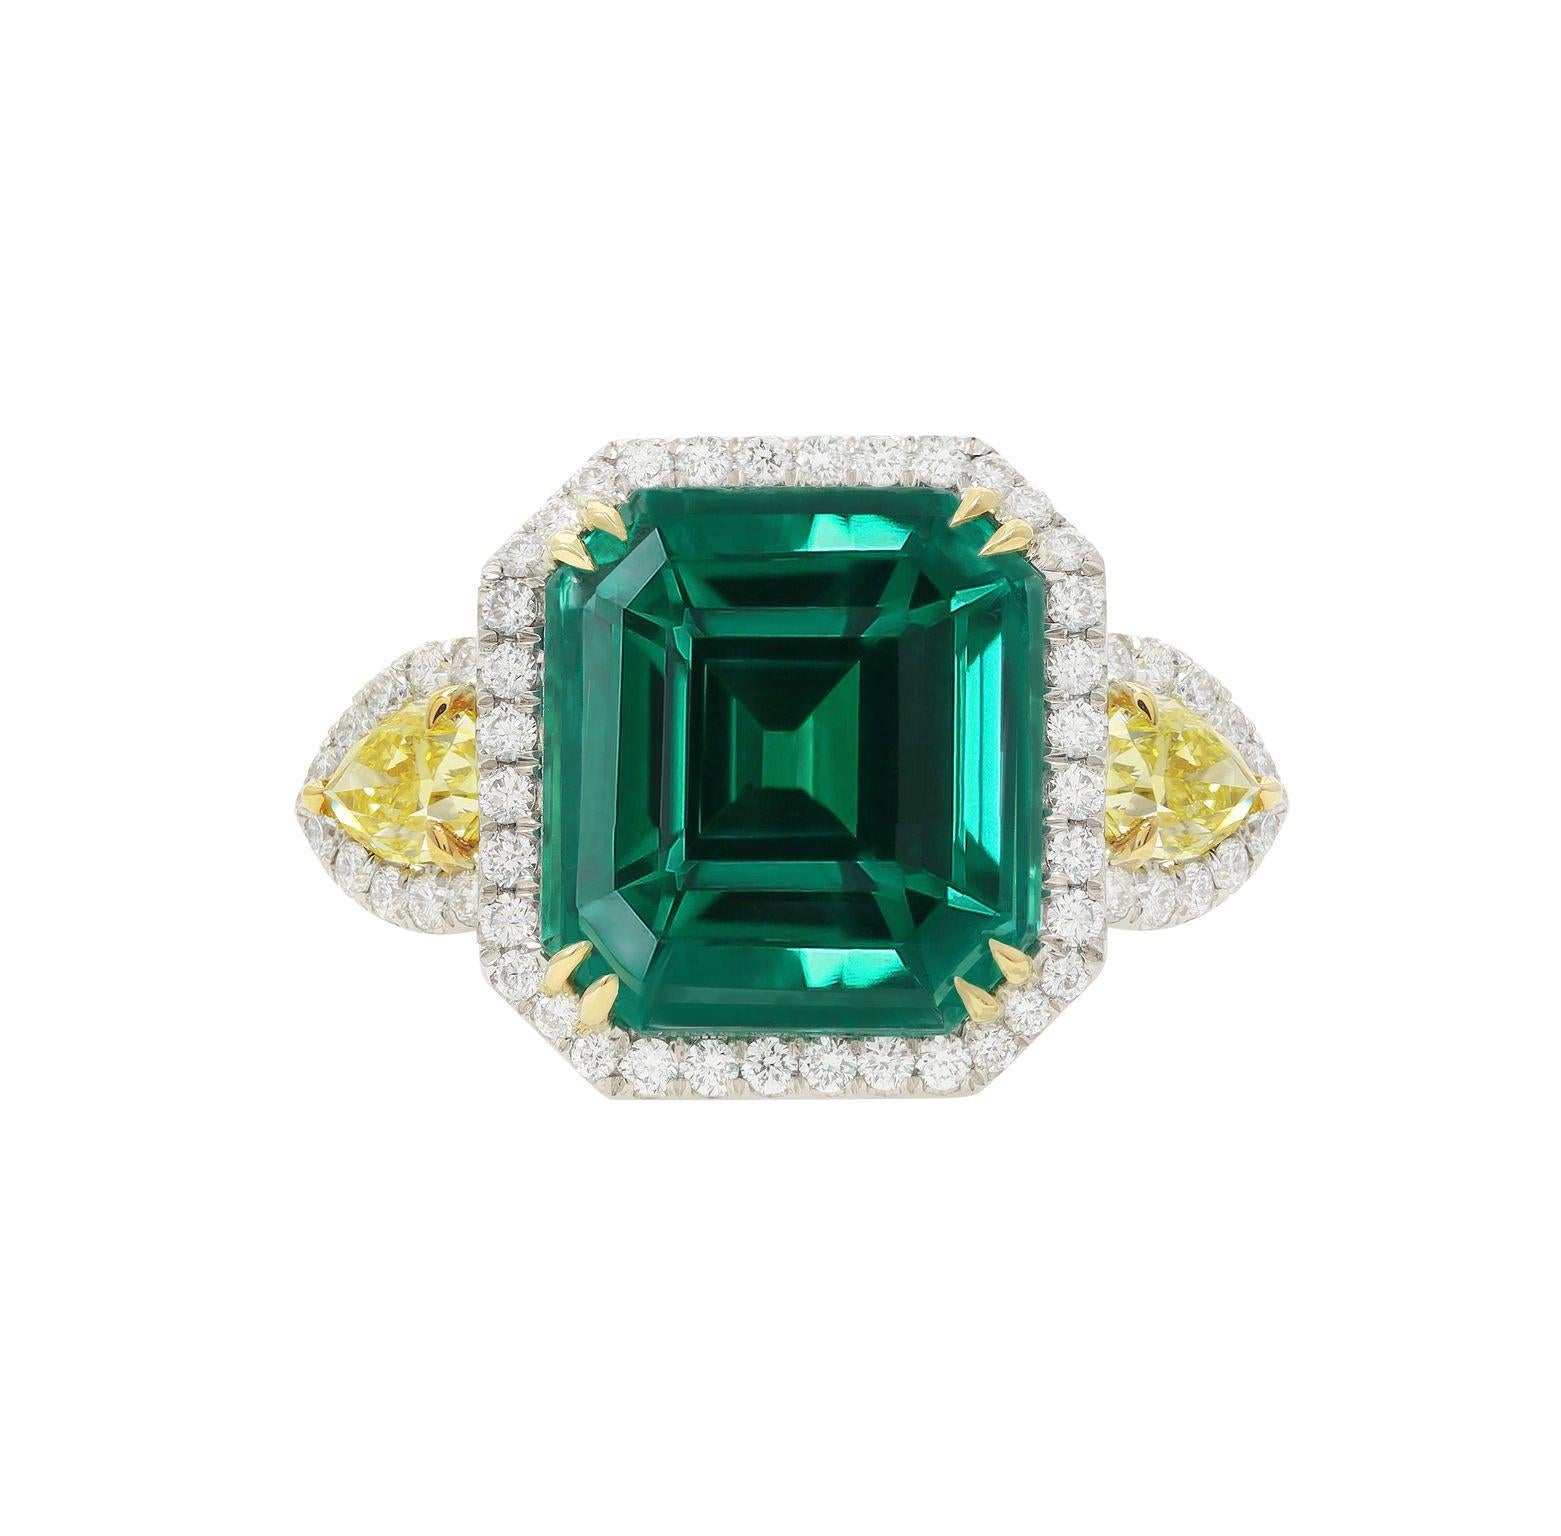 Platinum and 18 kt yellow gold emerald diamond ring featuring a 13.69 ct emerald alongside 2 pear shaped yellow diamonds totaling 0.96 cts tw on its sides surrounded by diamonds totaling 1.54 cts tw in a halo setting (C.Dunaigre certified).
Diana M.